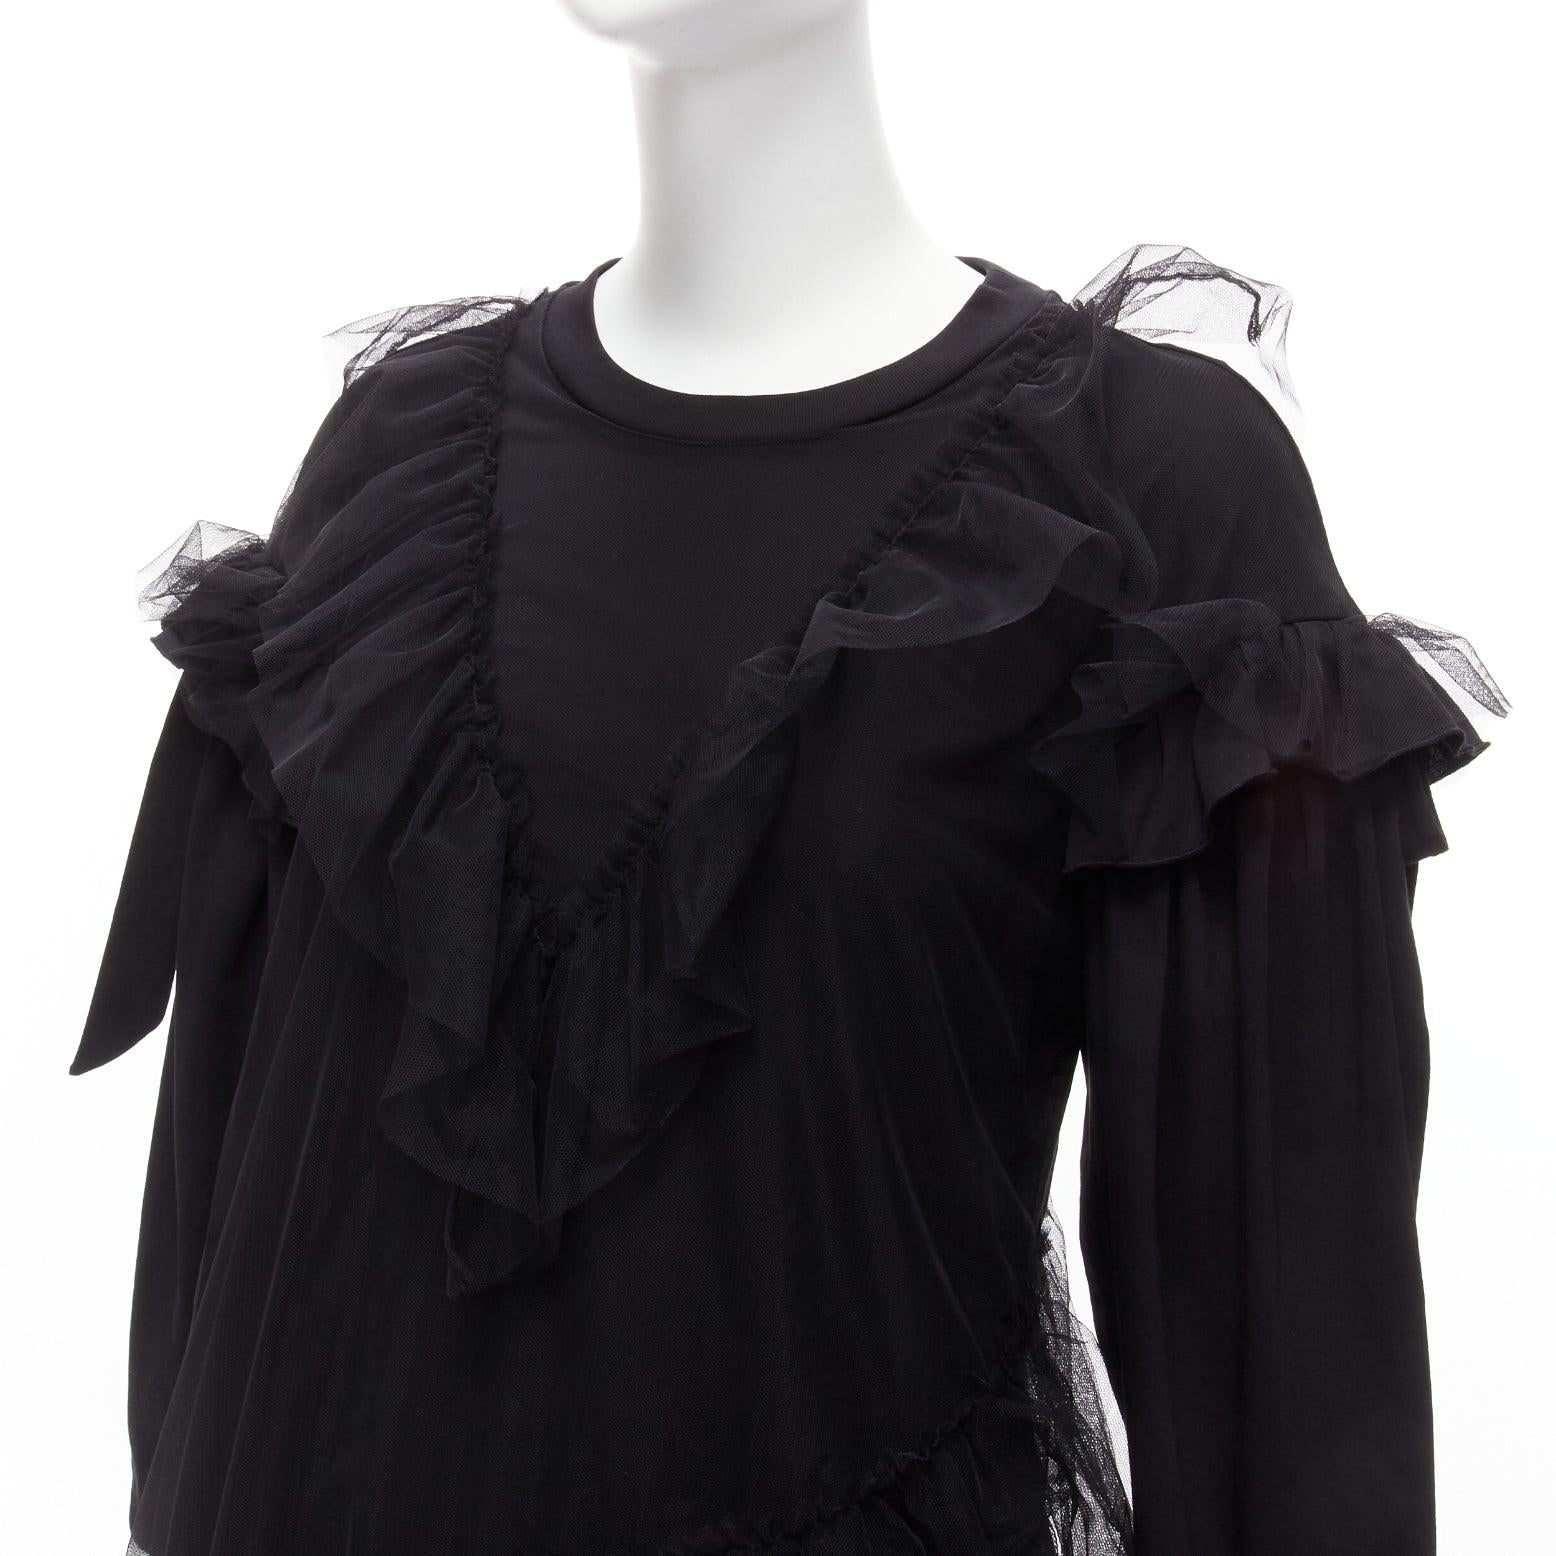 SIMONE ROCHA black asymmetric tulle ruffle trim overlay tshirt dress S
Reference: BSHW/A00018
Brand: Simone Rocha
Material: Cotton
Color: Black
Pattern: Solid
Closure: Slip On
Made in: Portugal

CONDITION:
Condition: Excellent, this item was